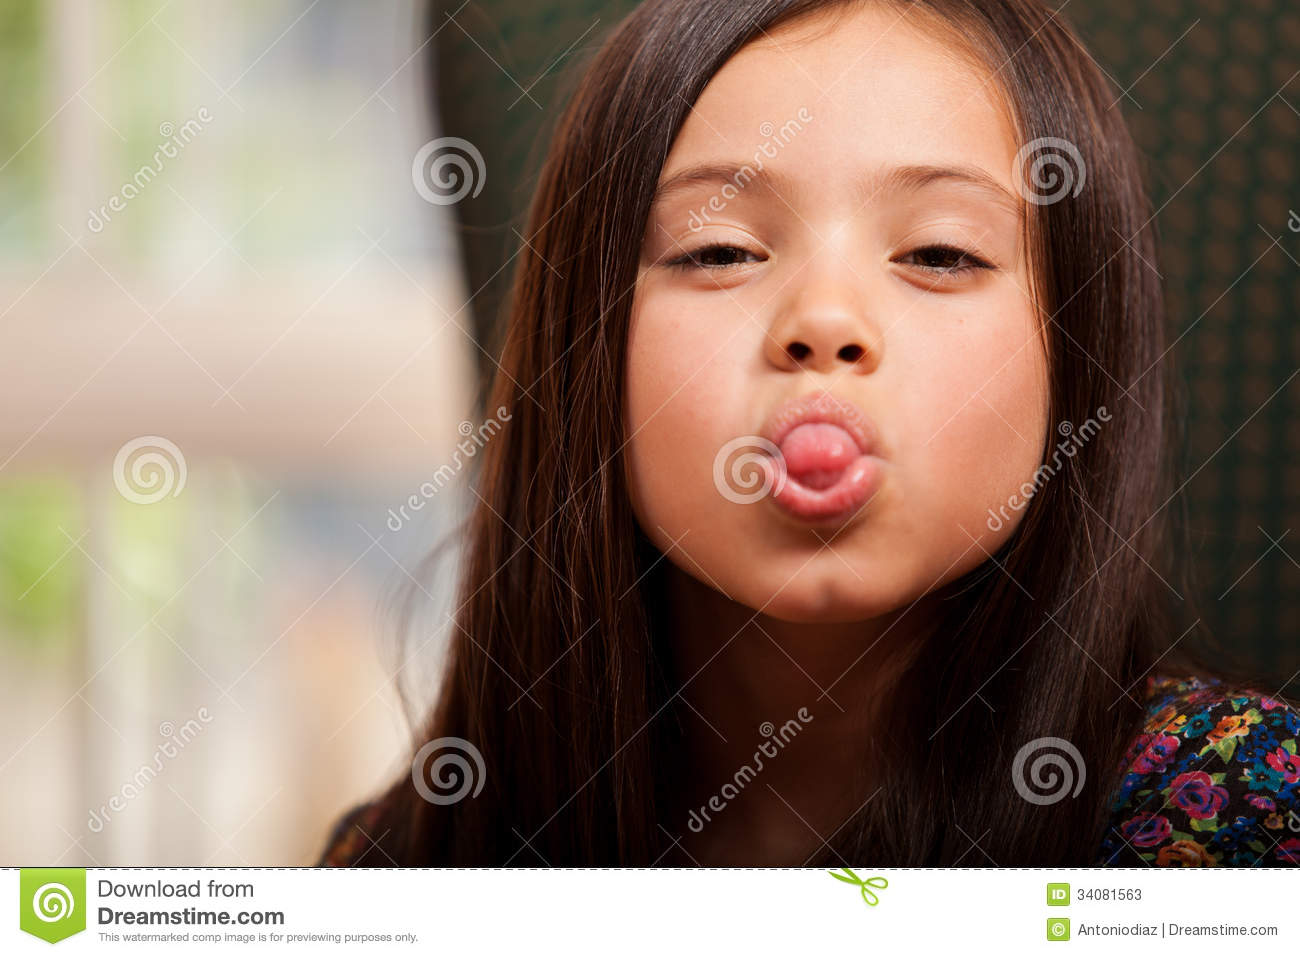 Little Girl Sticking Her Tongue Out Stock Photos   Image  34081563